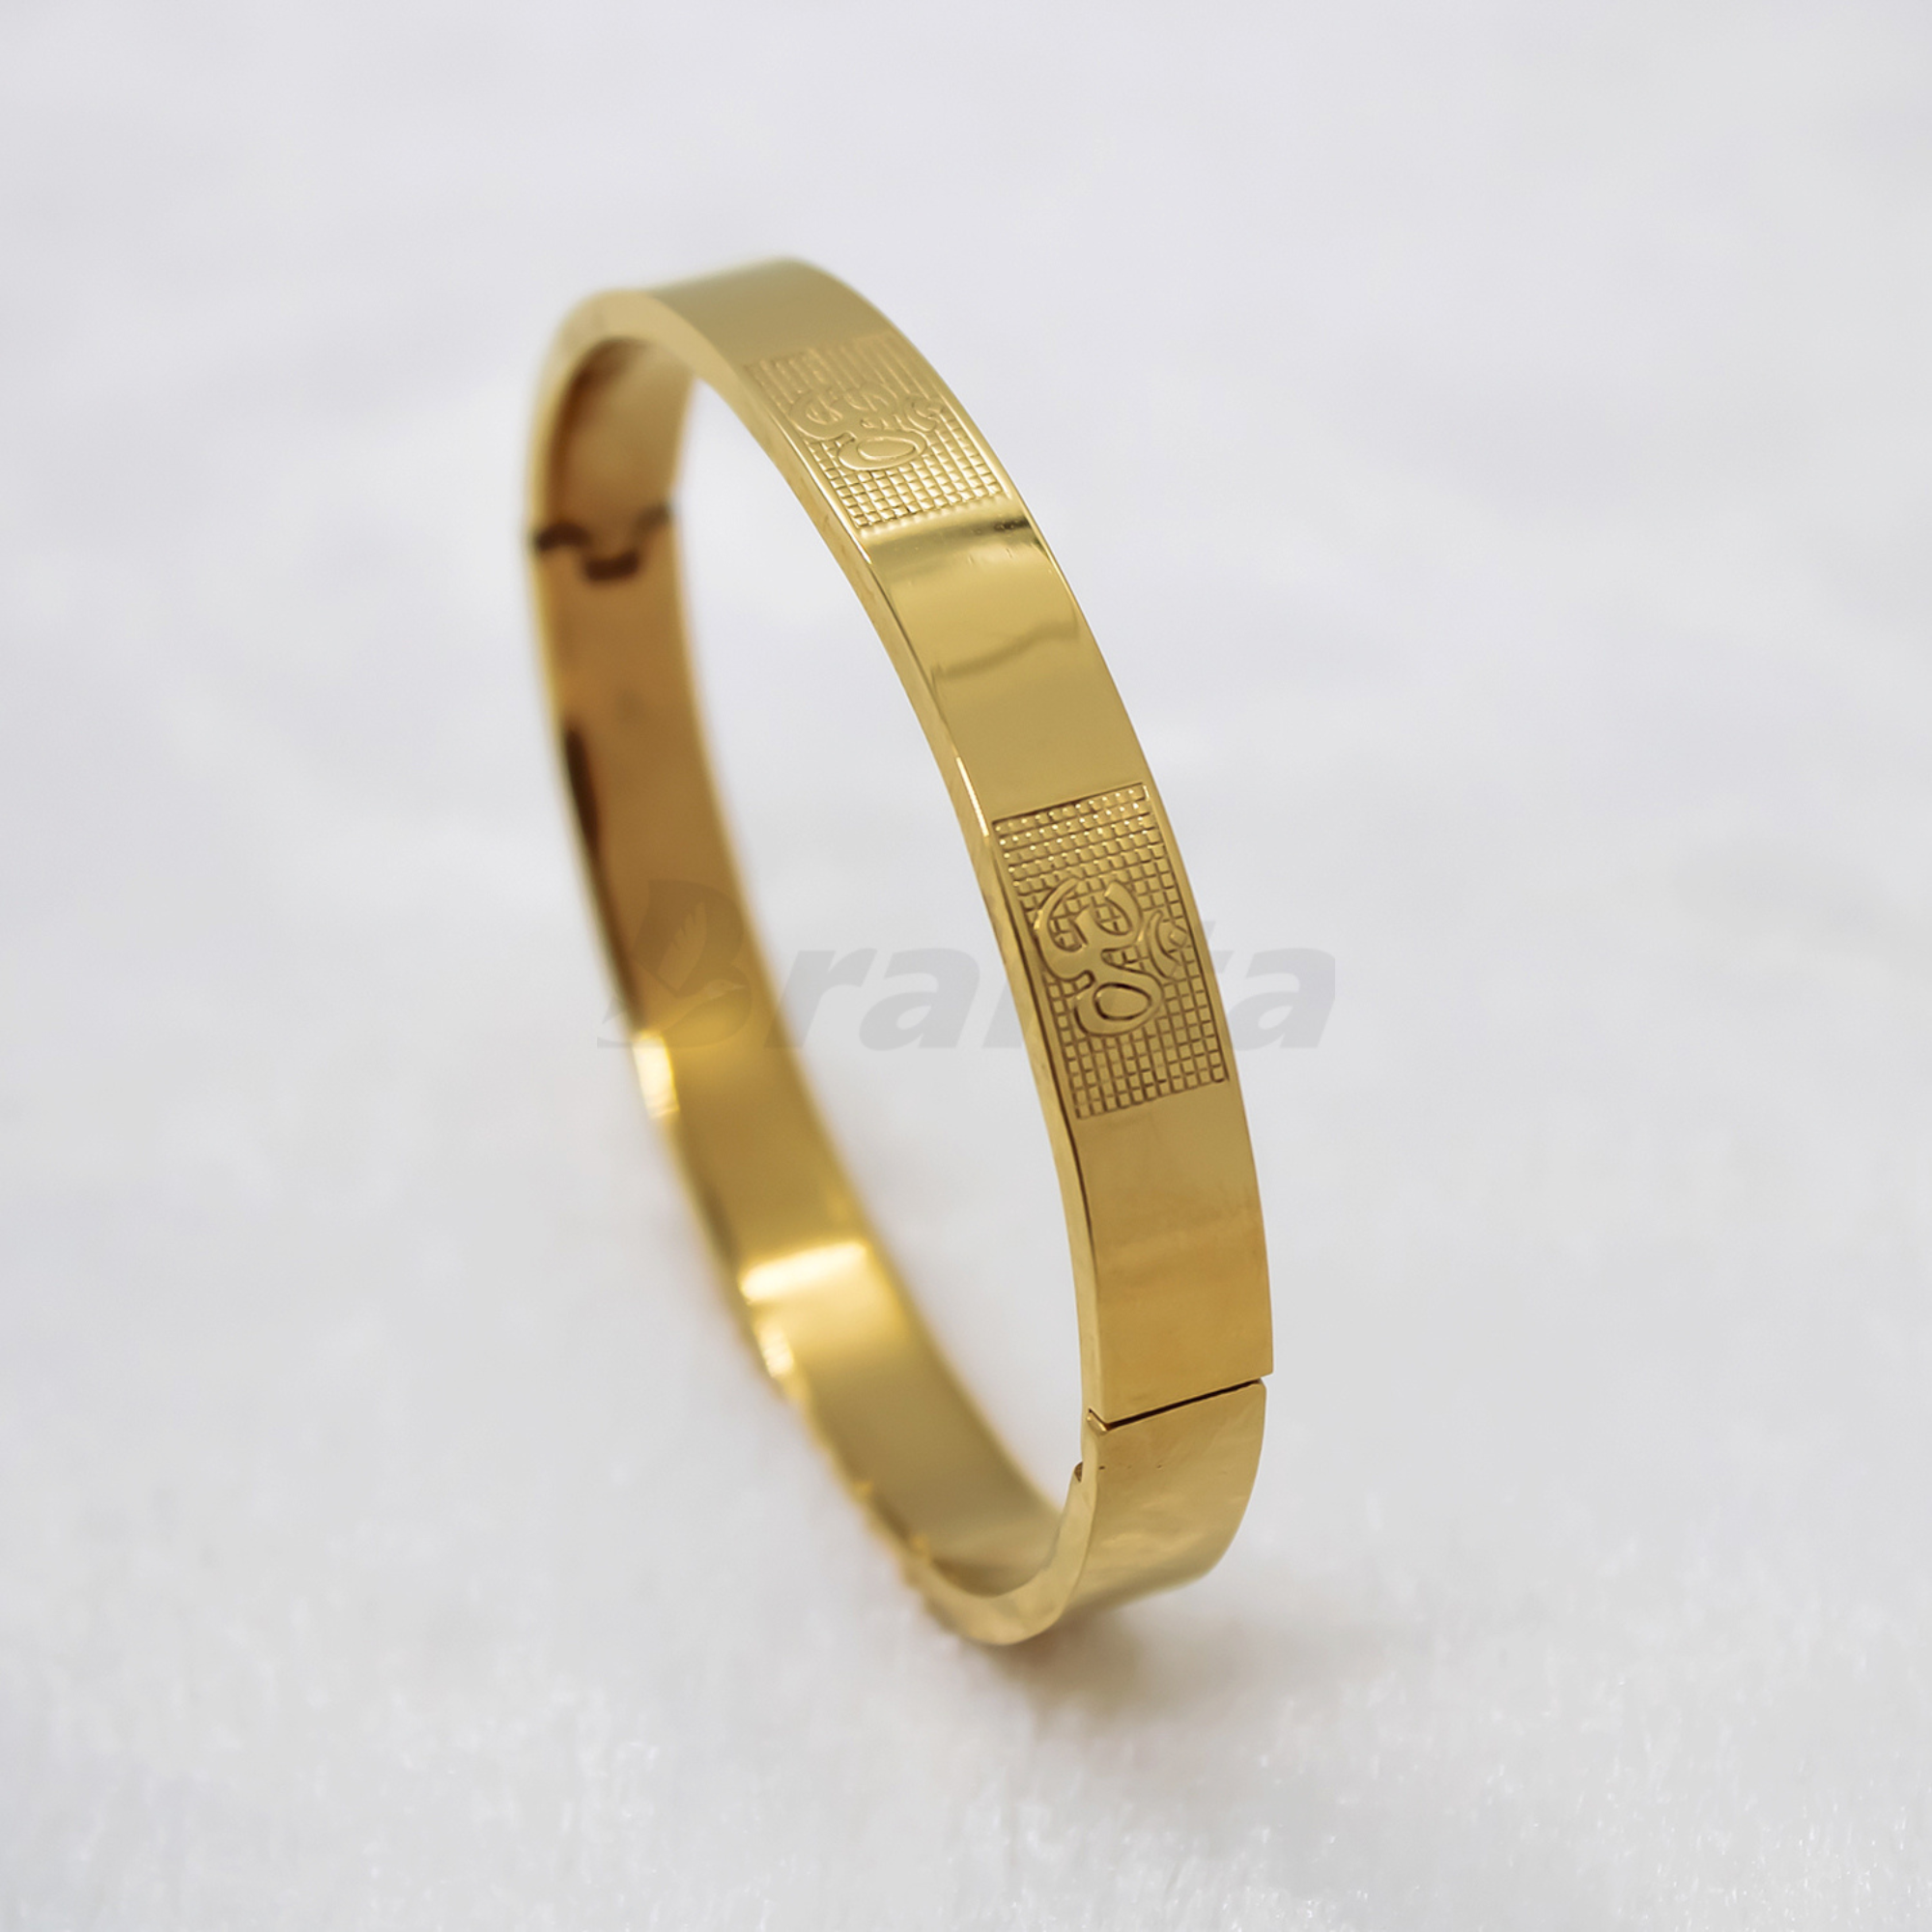 Gold bracelets designs with WEIGHT FOR Men - YouTube